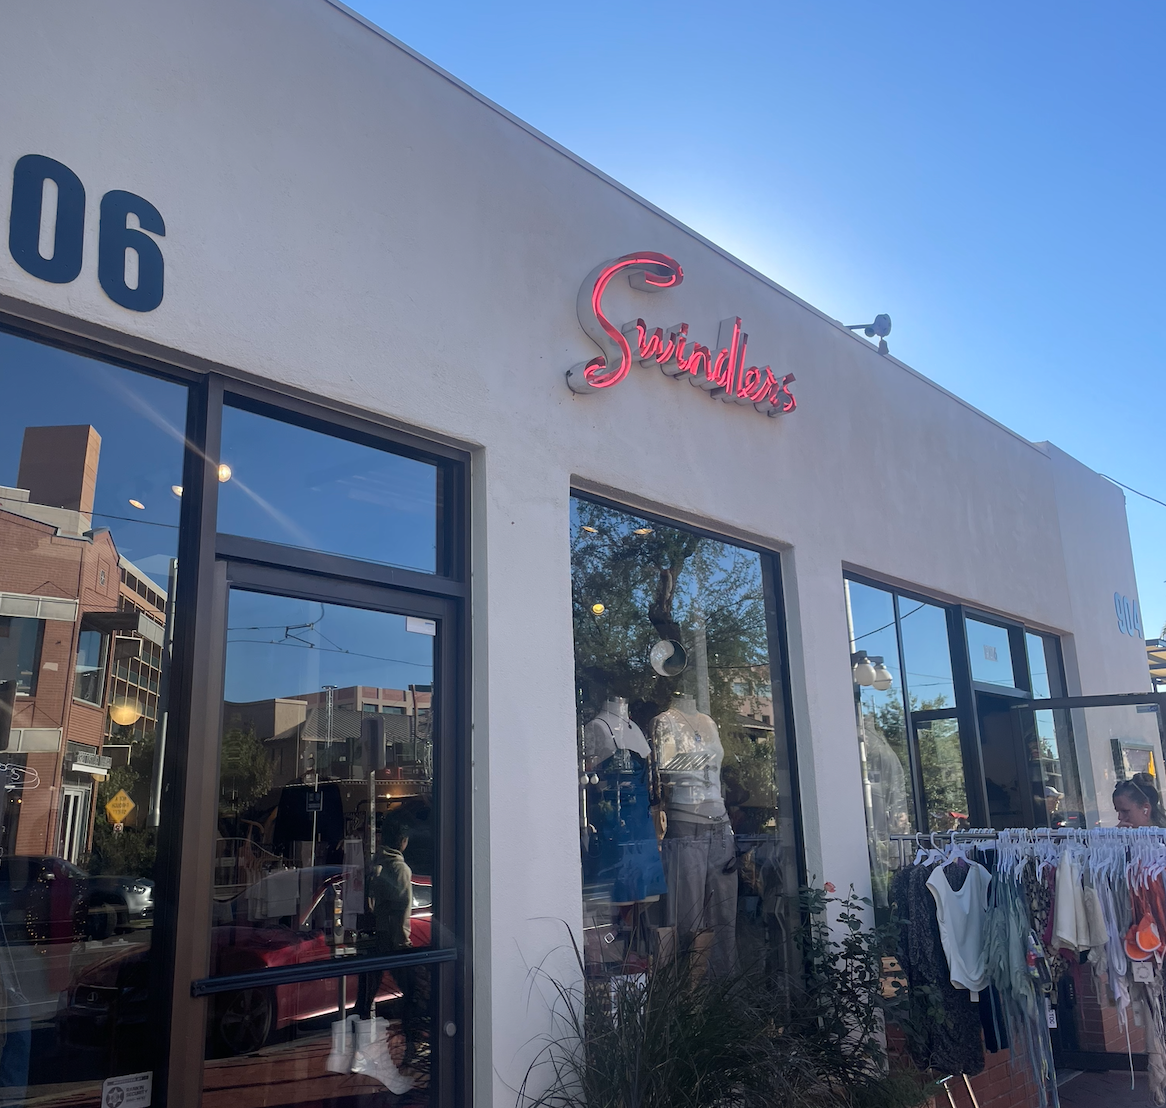 Swindlers+is+a+Tucson-based+boutique+that+caters+to+the+fashion+trends+of+University+of+Arizona+students.+The+shop+can+be+found+near+campus+at+906+E.+University+Blvd.